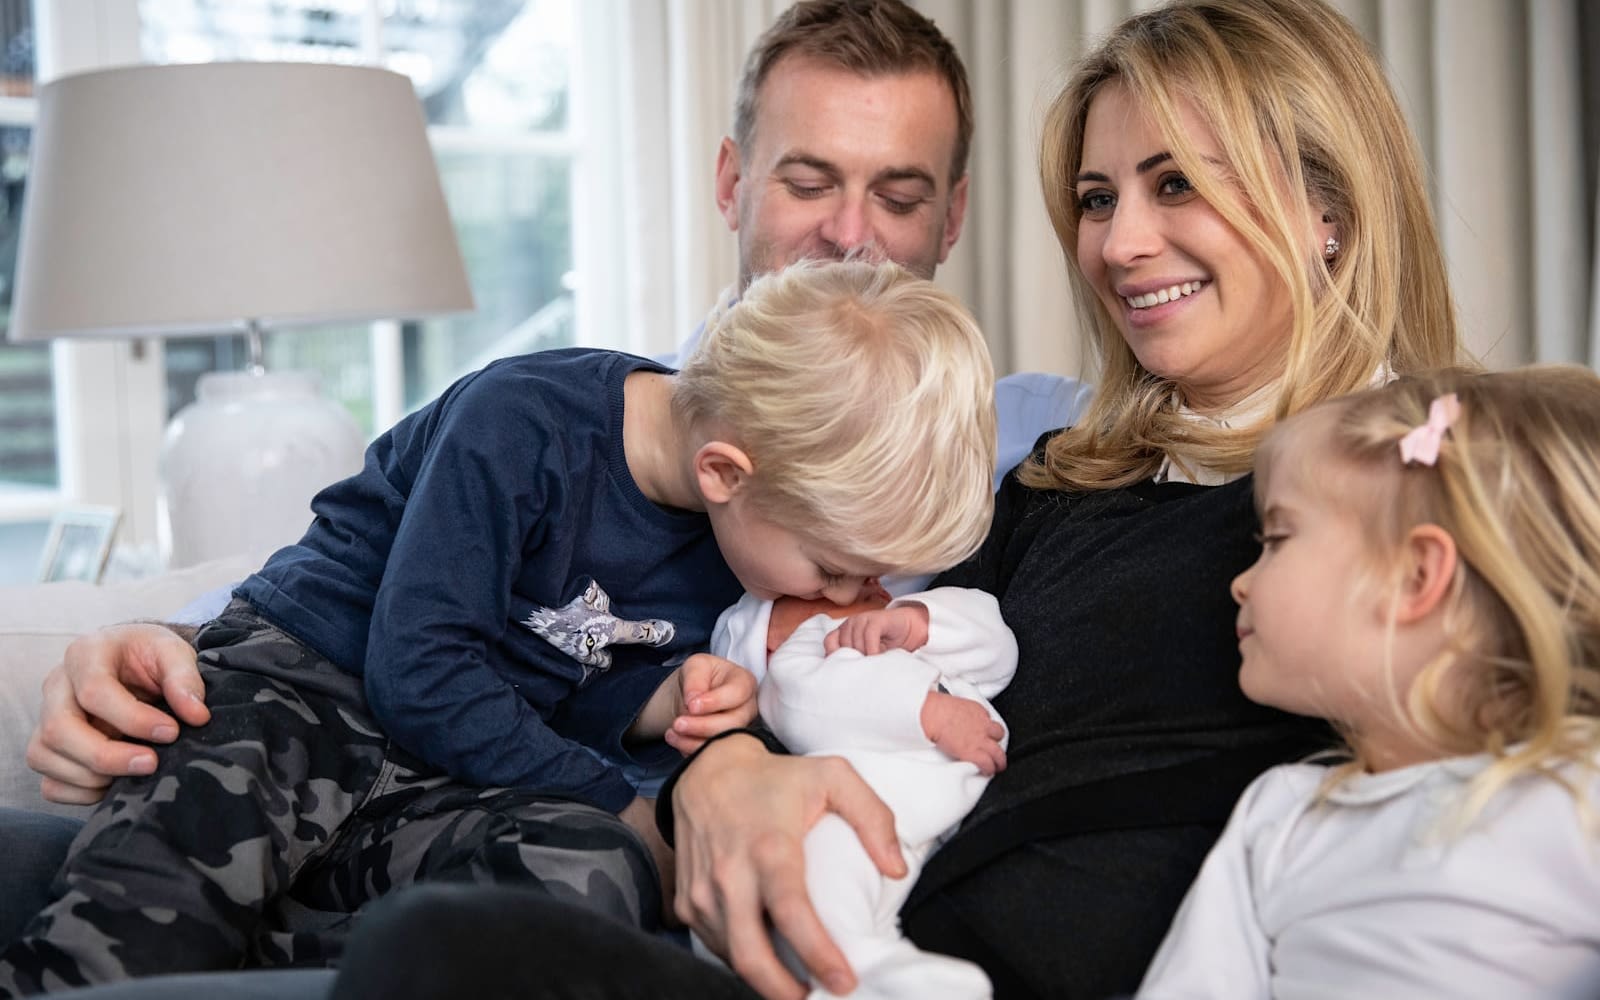 Holly Branson with husband Freddie Andrewes and children Etta, Artie and baby Lola